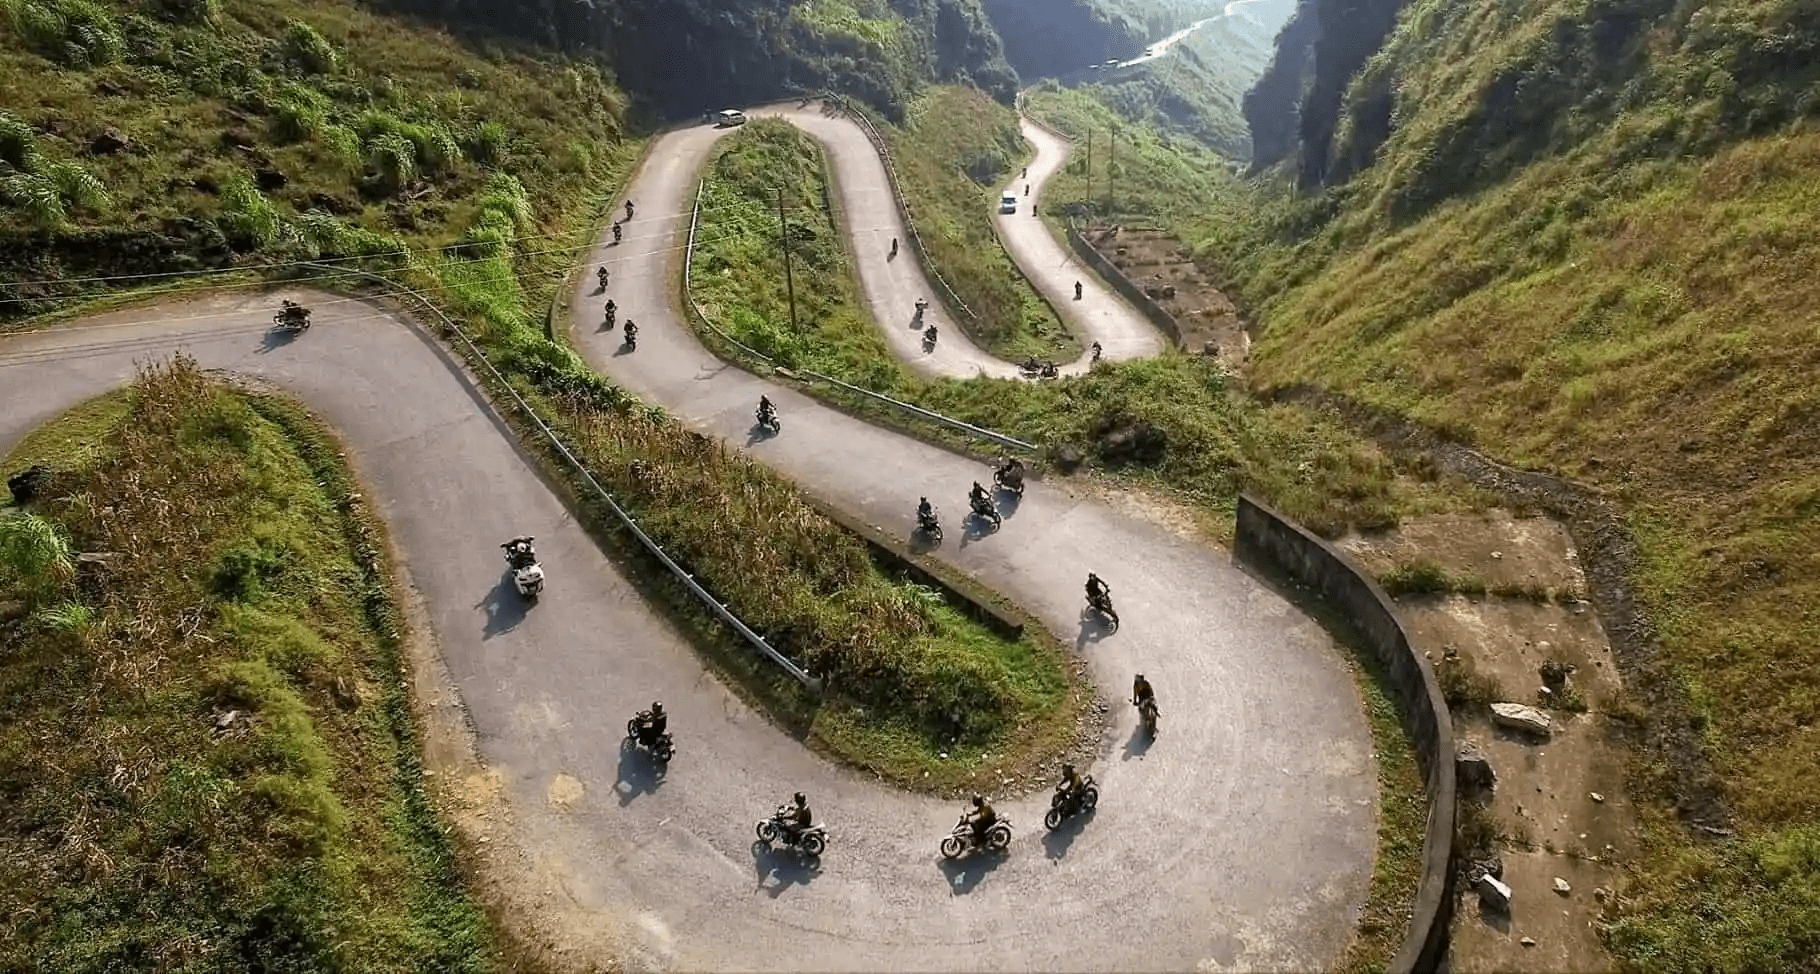 Discover Ha Giang by motorbike